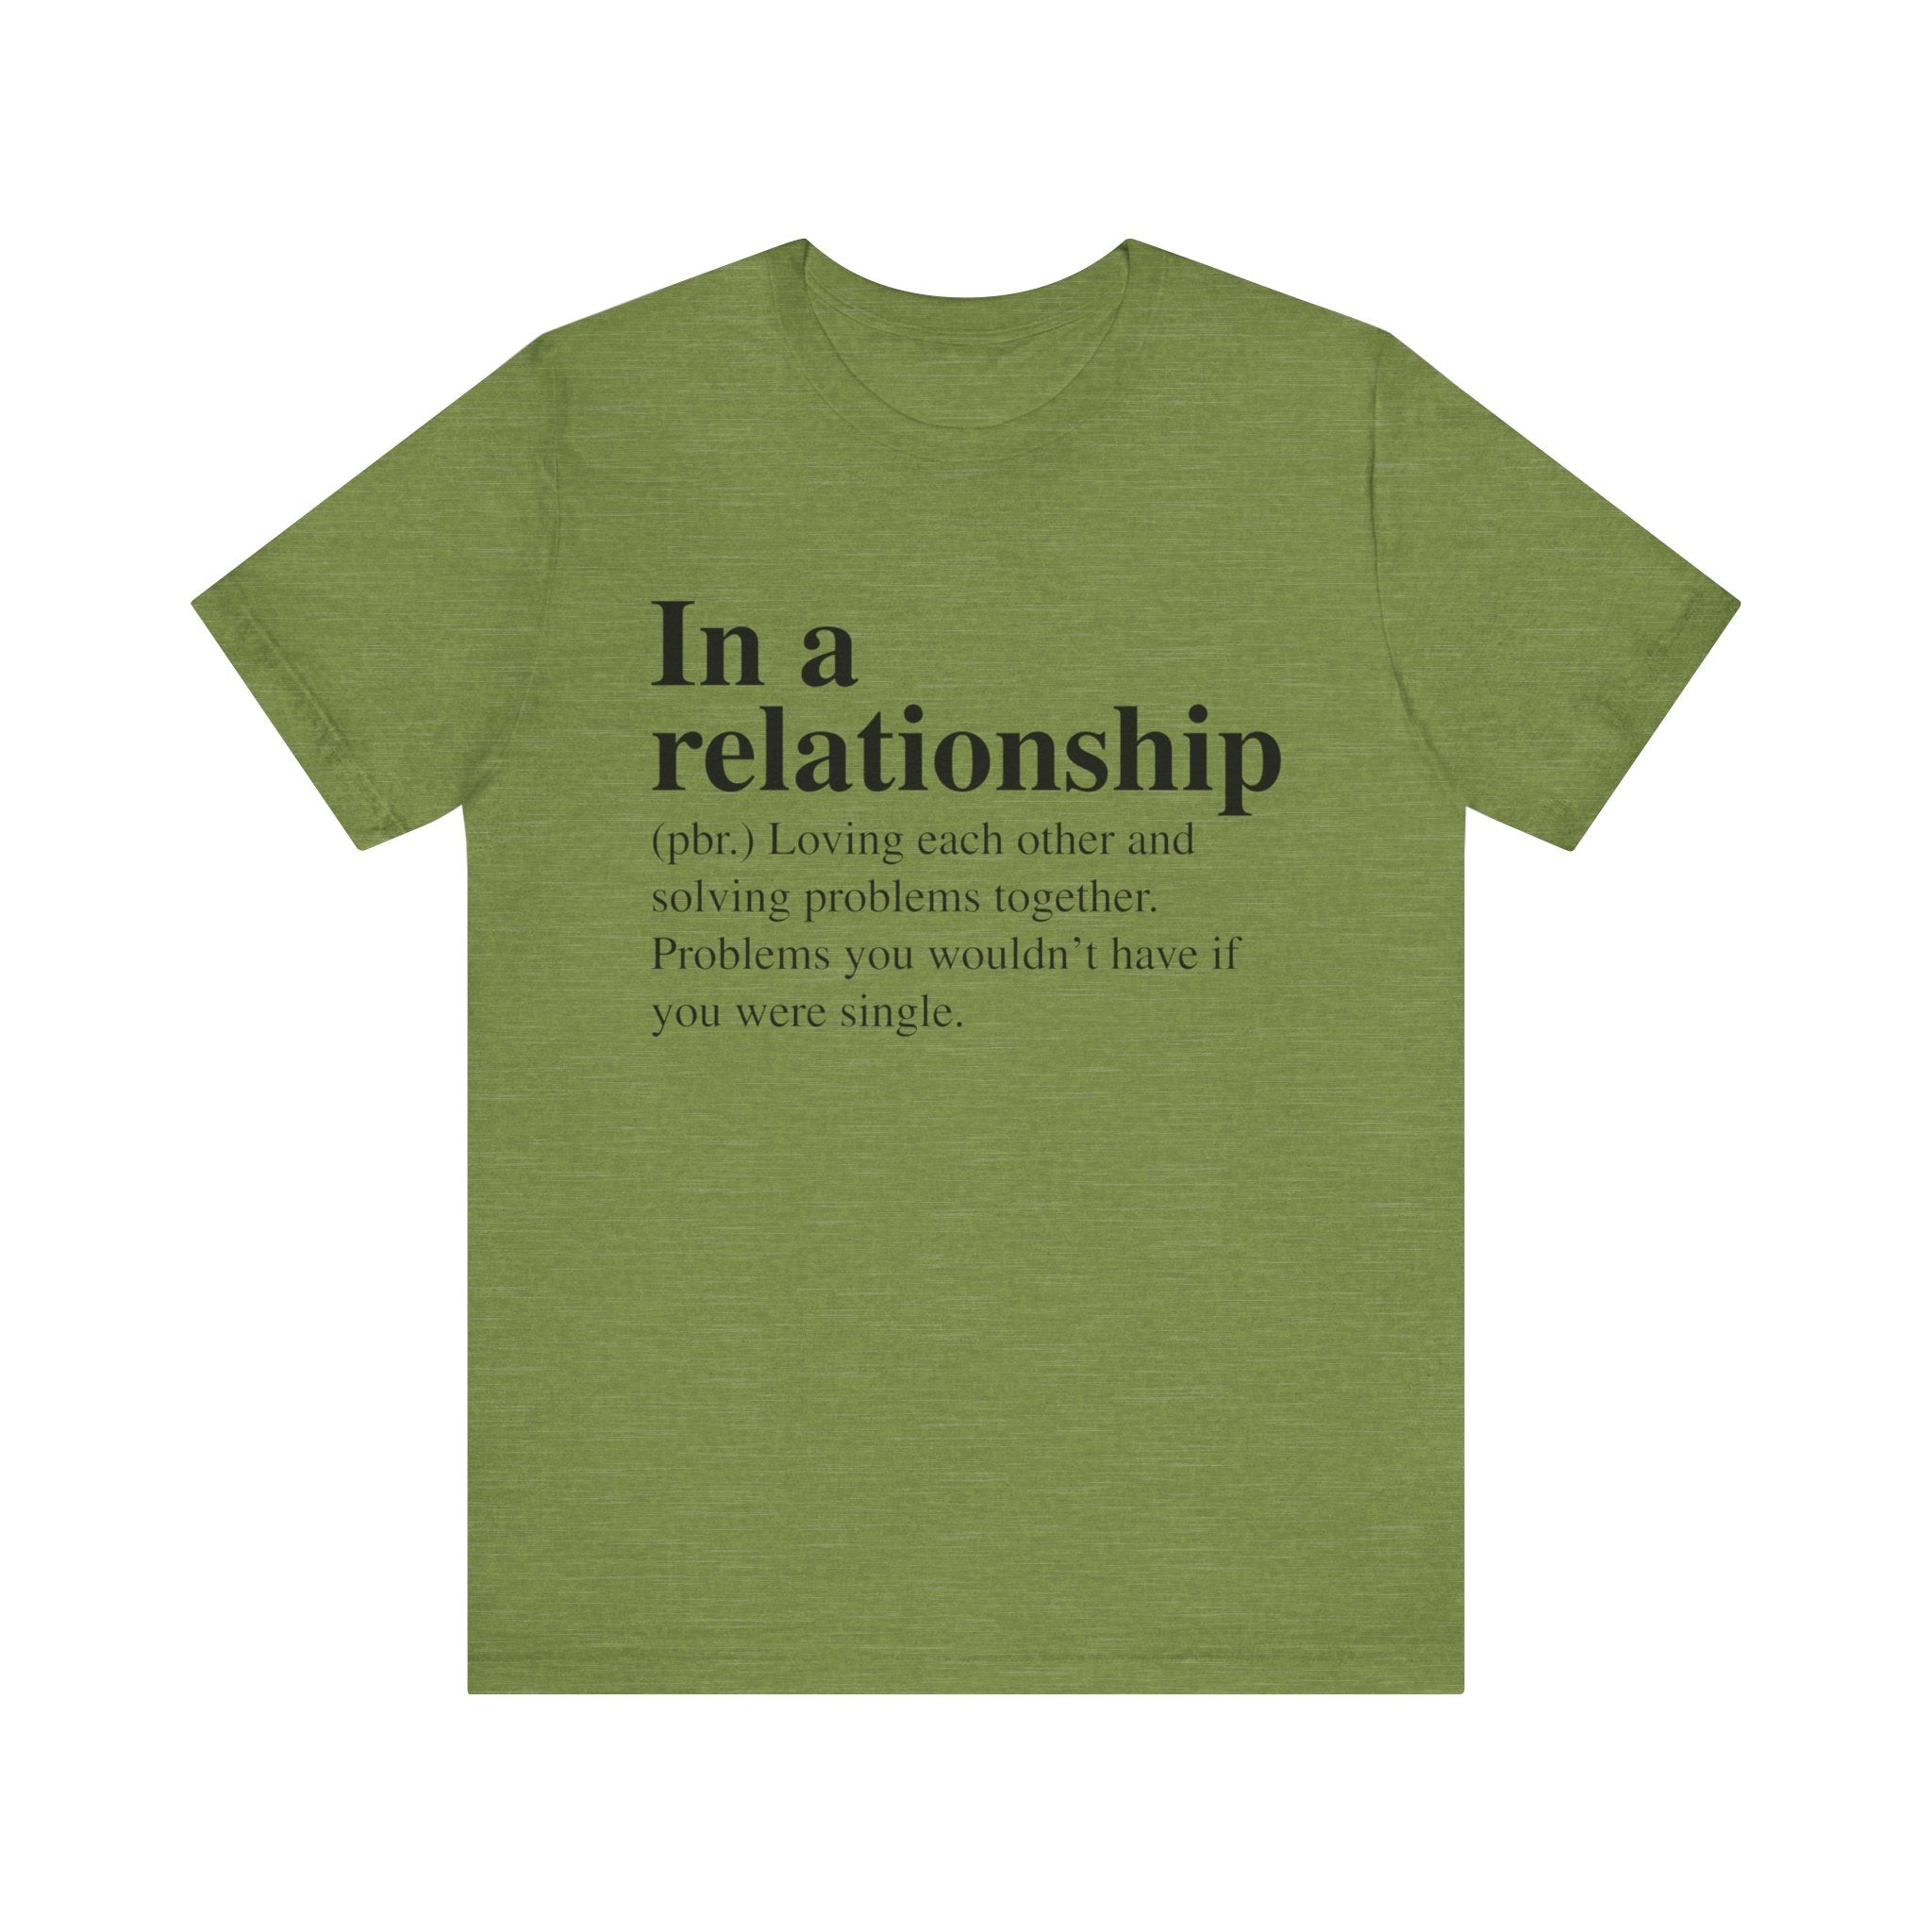 Olive green unisex In a Relationship T-Shirt with white text stating "in a relationship (npr.): loving each other and solving problems together. Problems you wouldn't have if you were single.